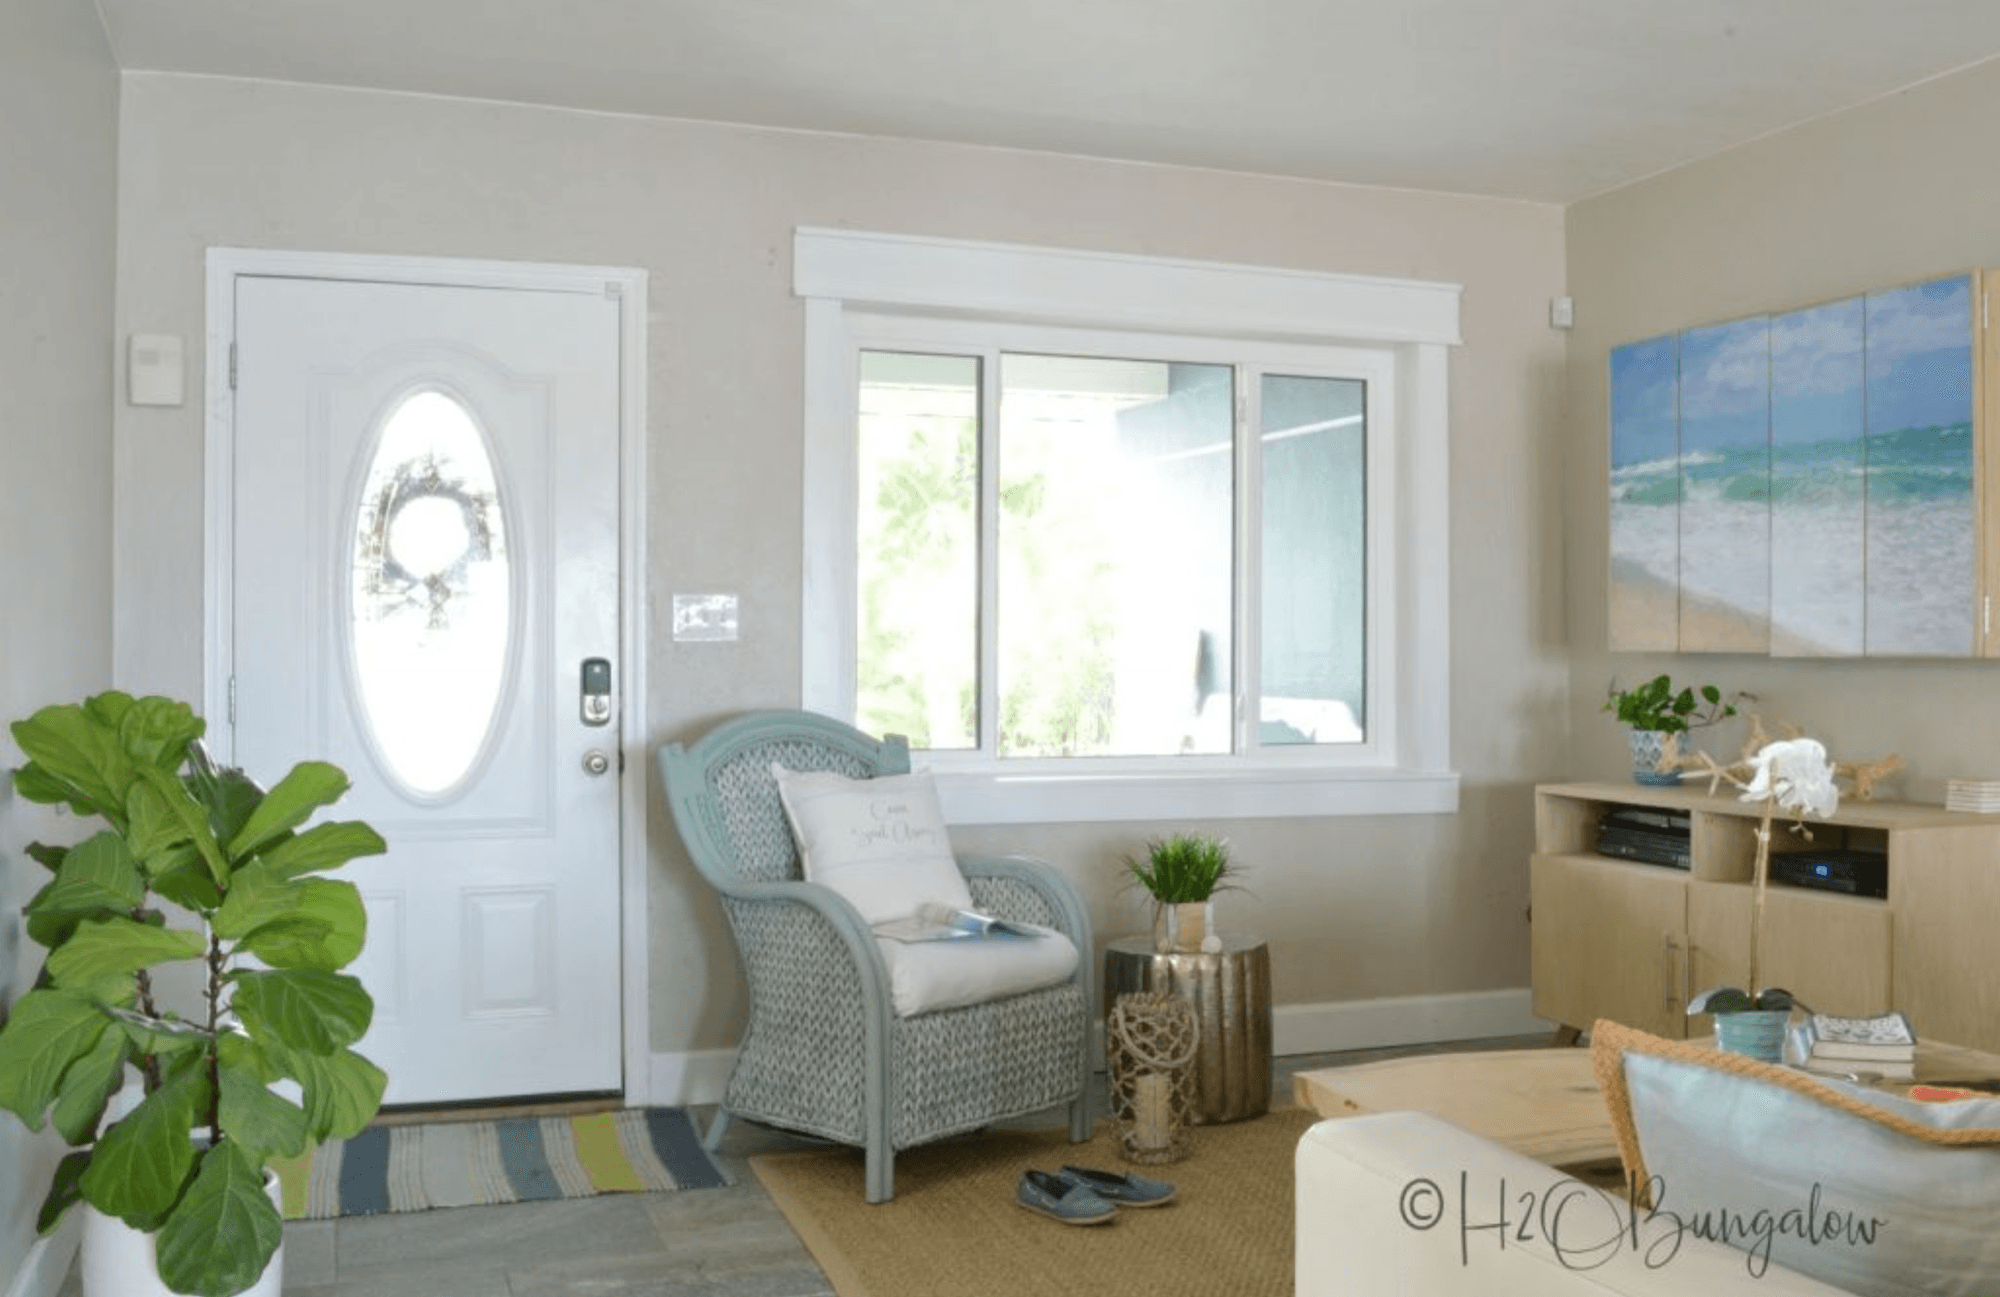 For Blog Only - H20 Bungalow - Trim Living Room